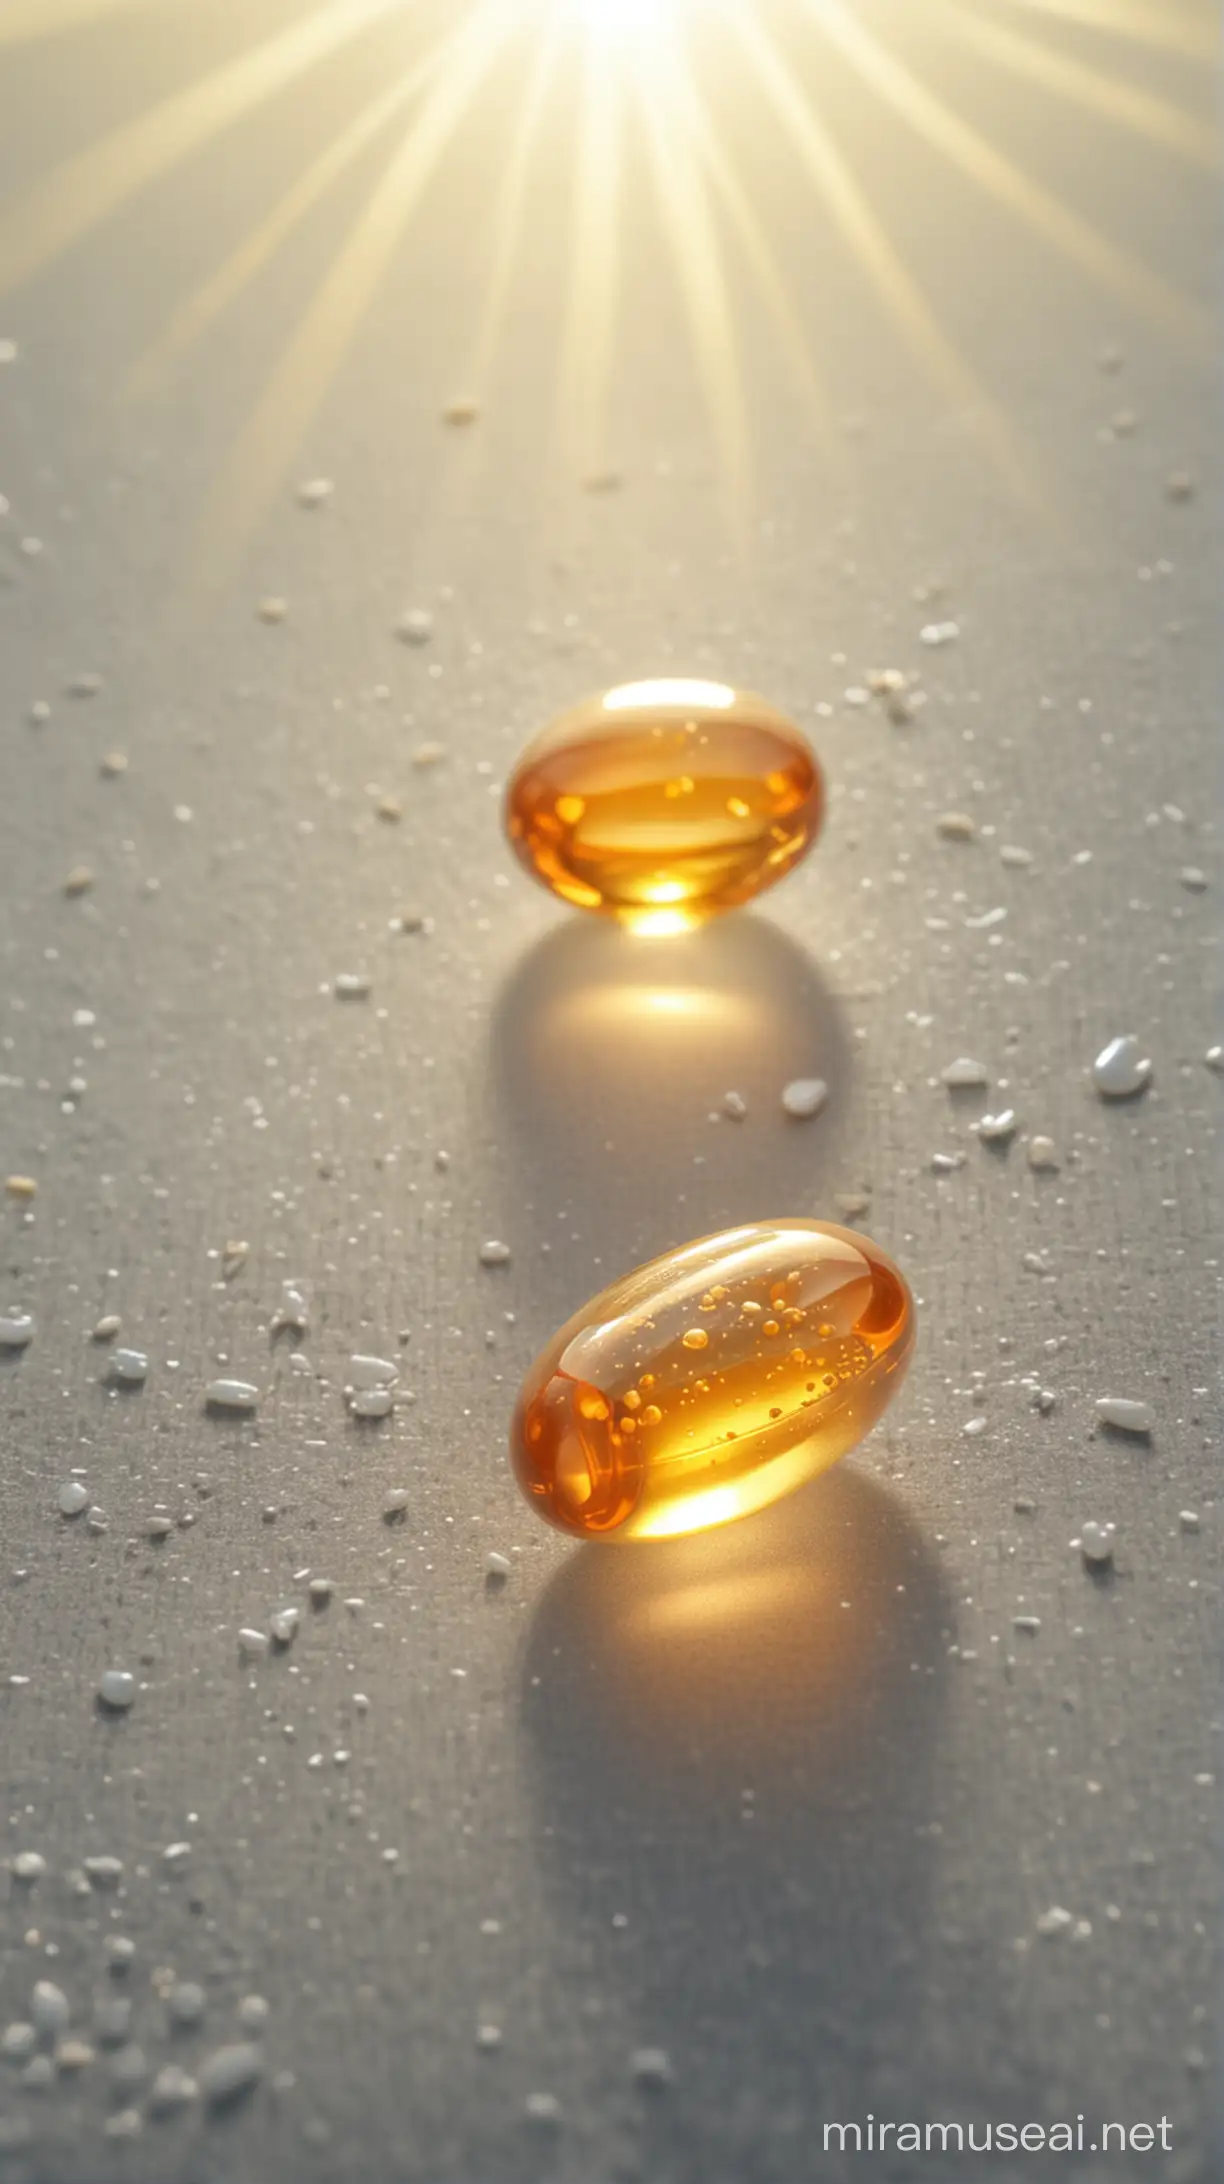 Vibrant Vitamin D Capsule Bathed in Sunlight on Natural Background